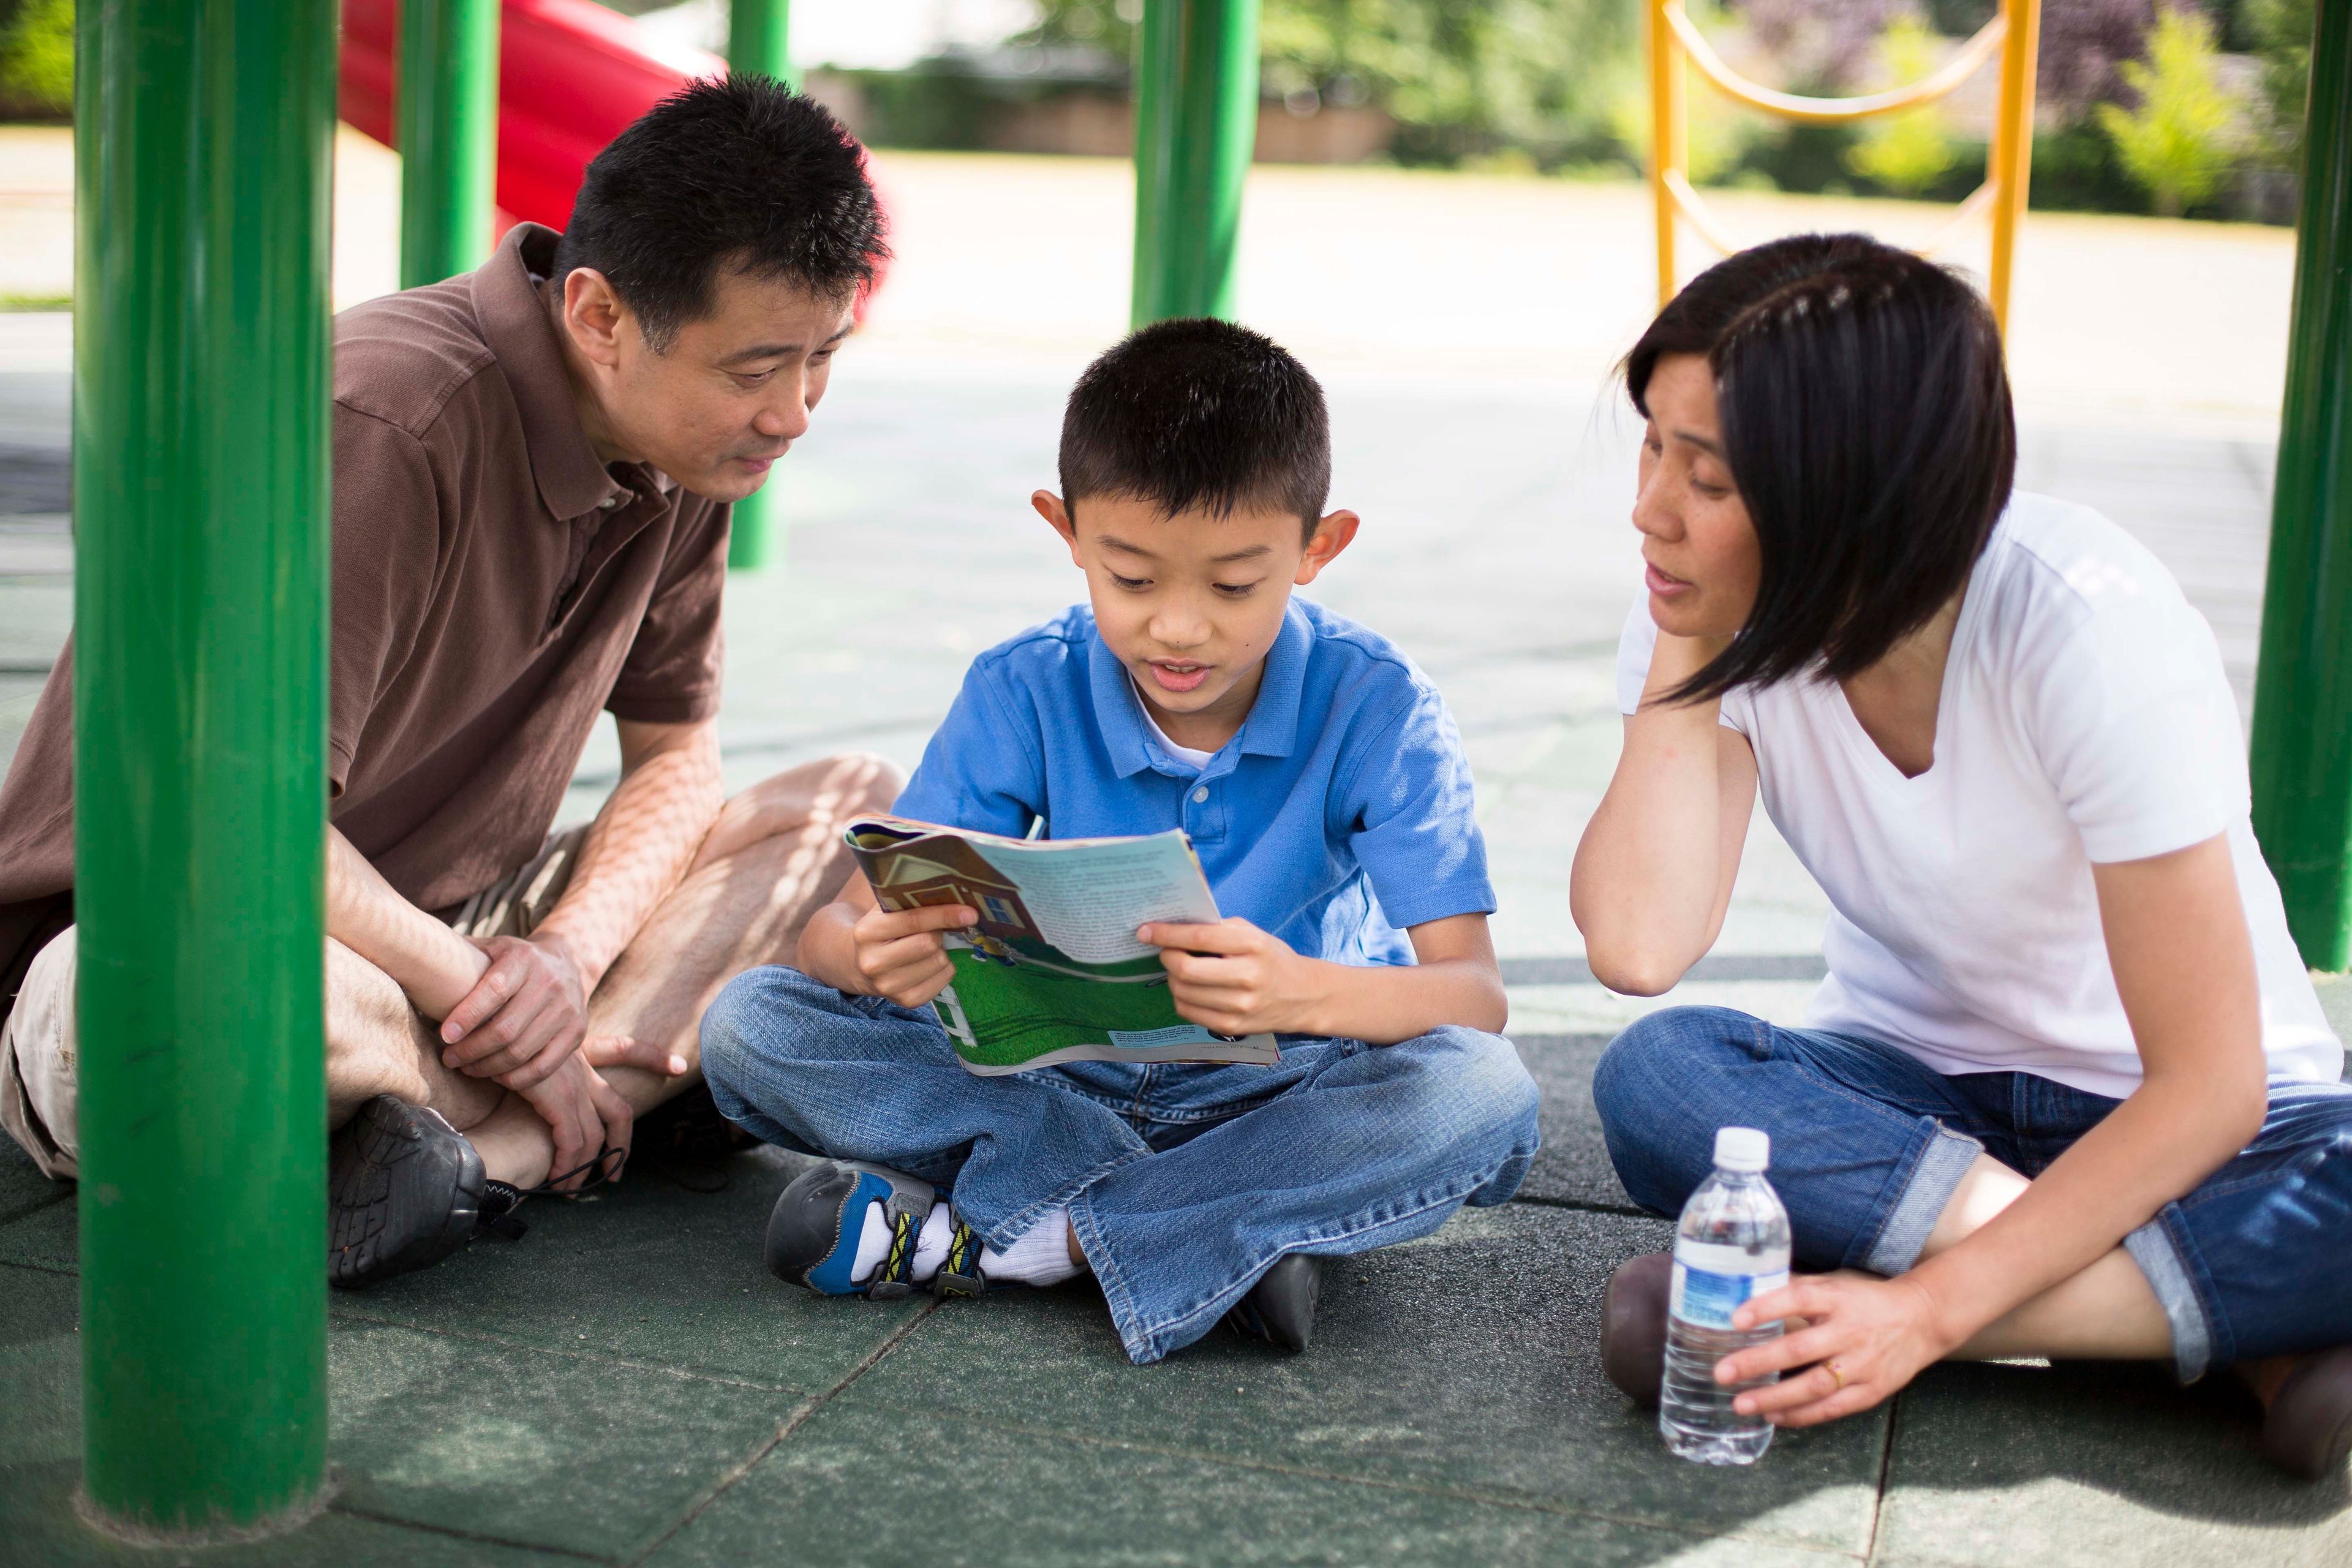 A mother and father read together with their son on the playground.  